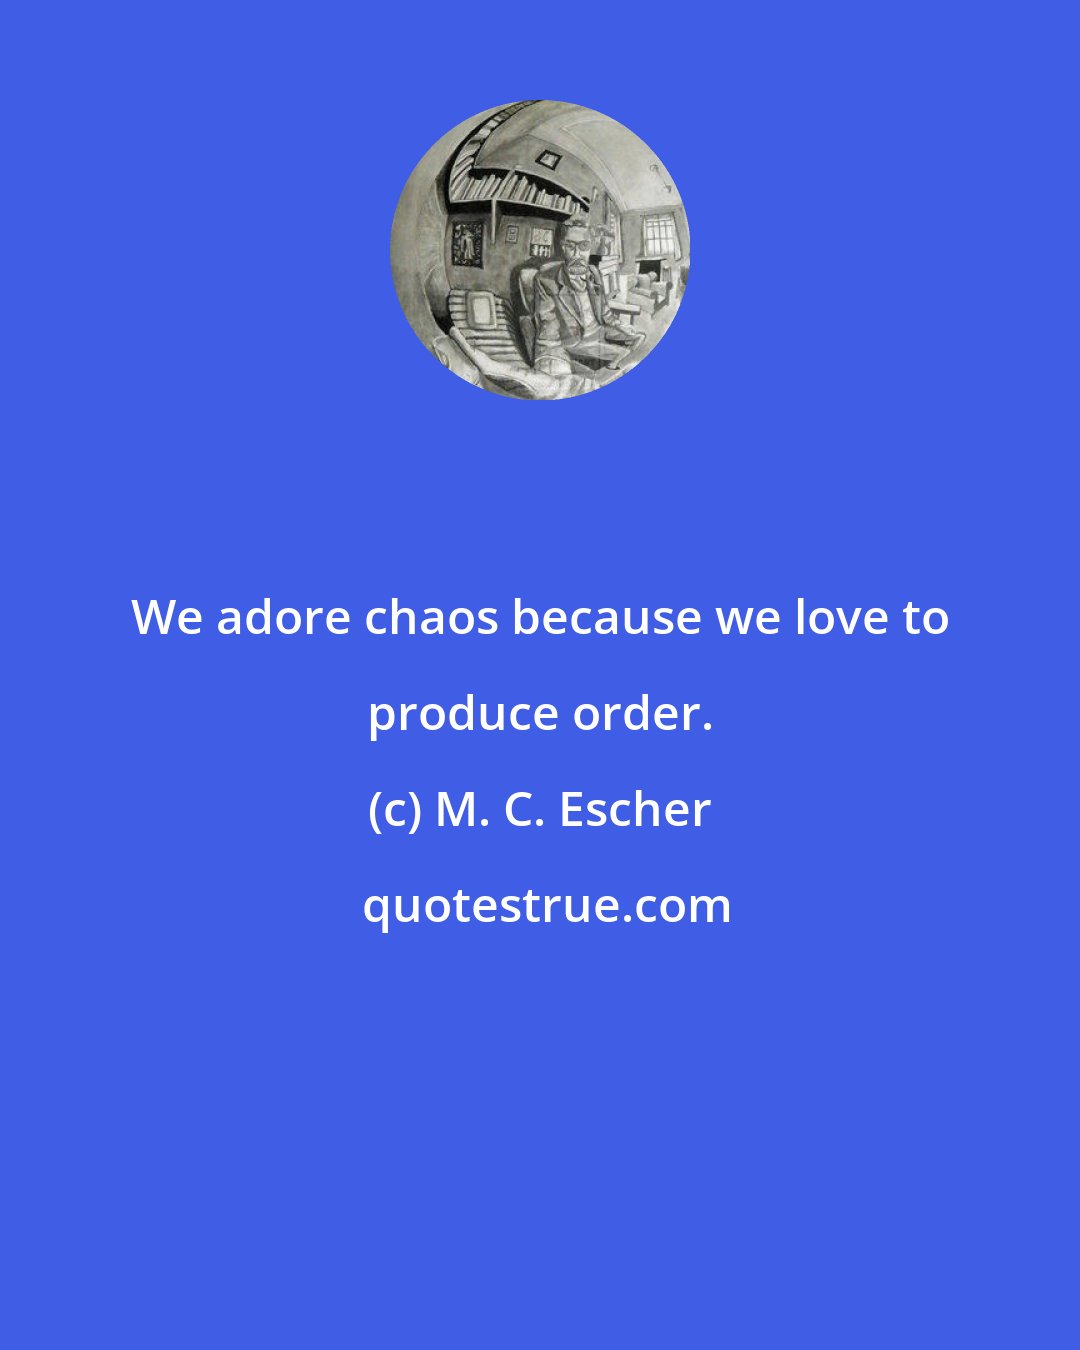 M. C. Escher: We adore chaos because we love to produce order.